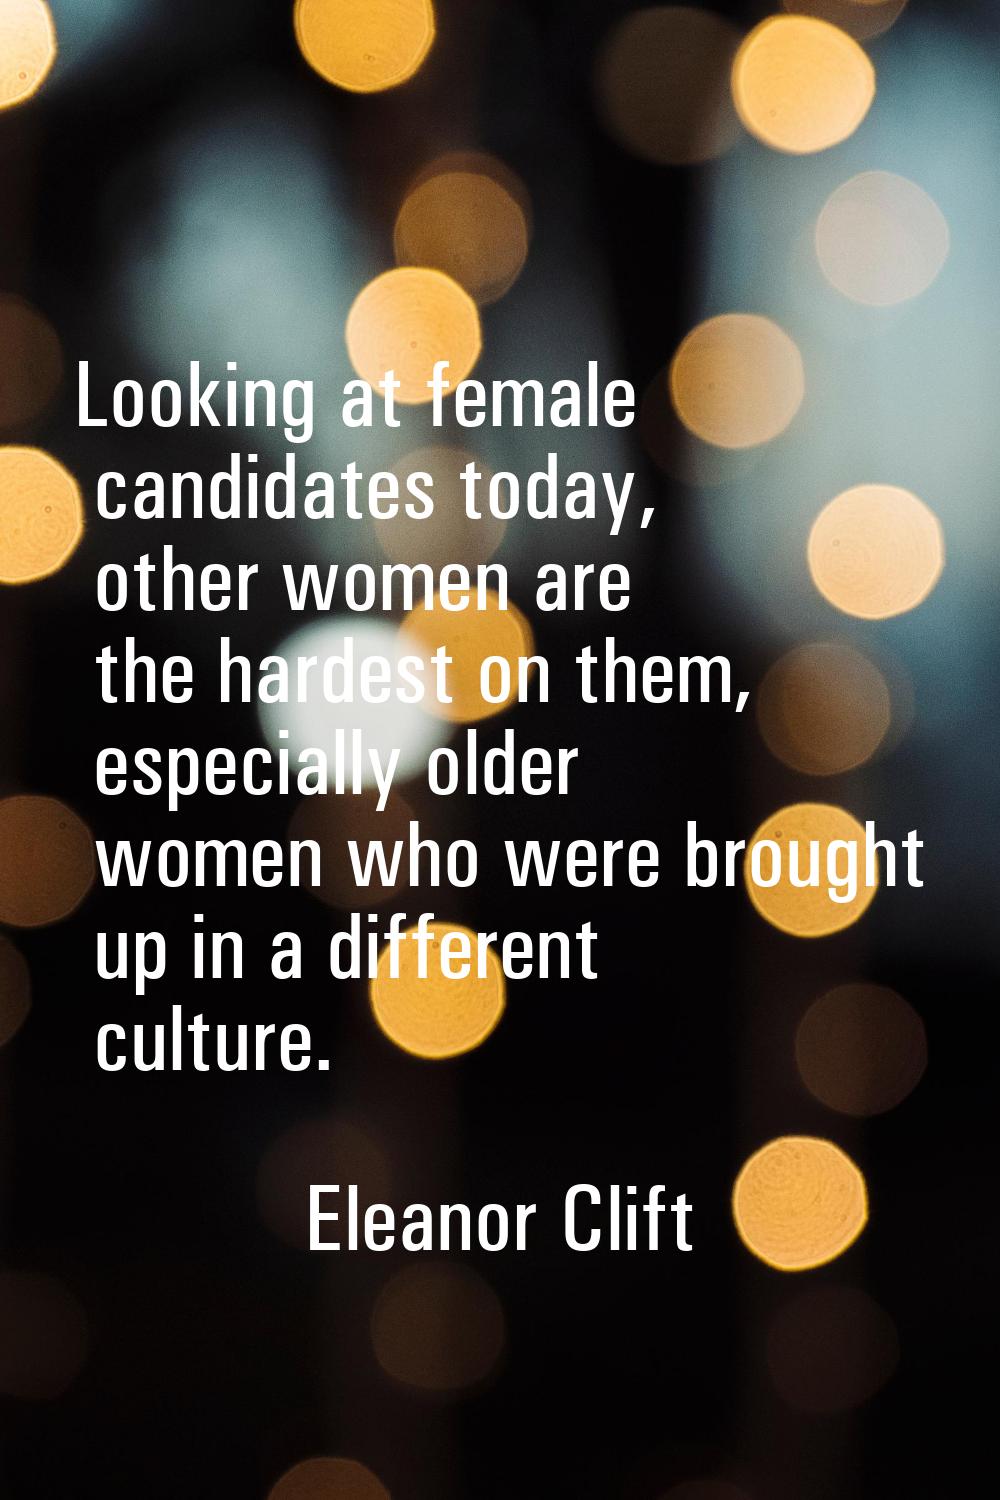 Looking at female candidates today, other women are the hardest on them, especially older women who